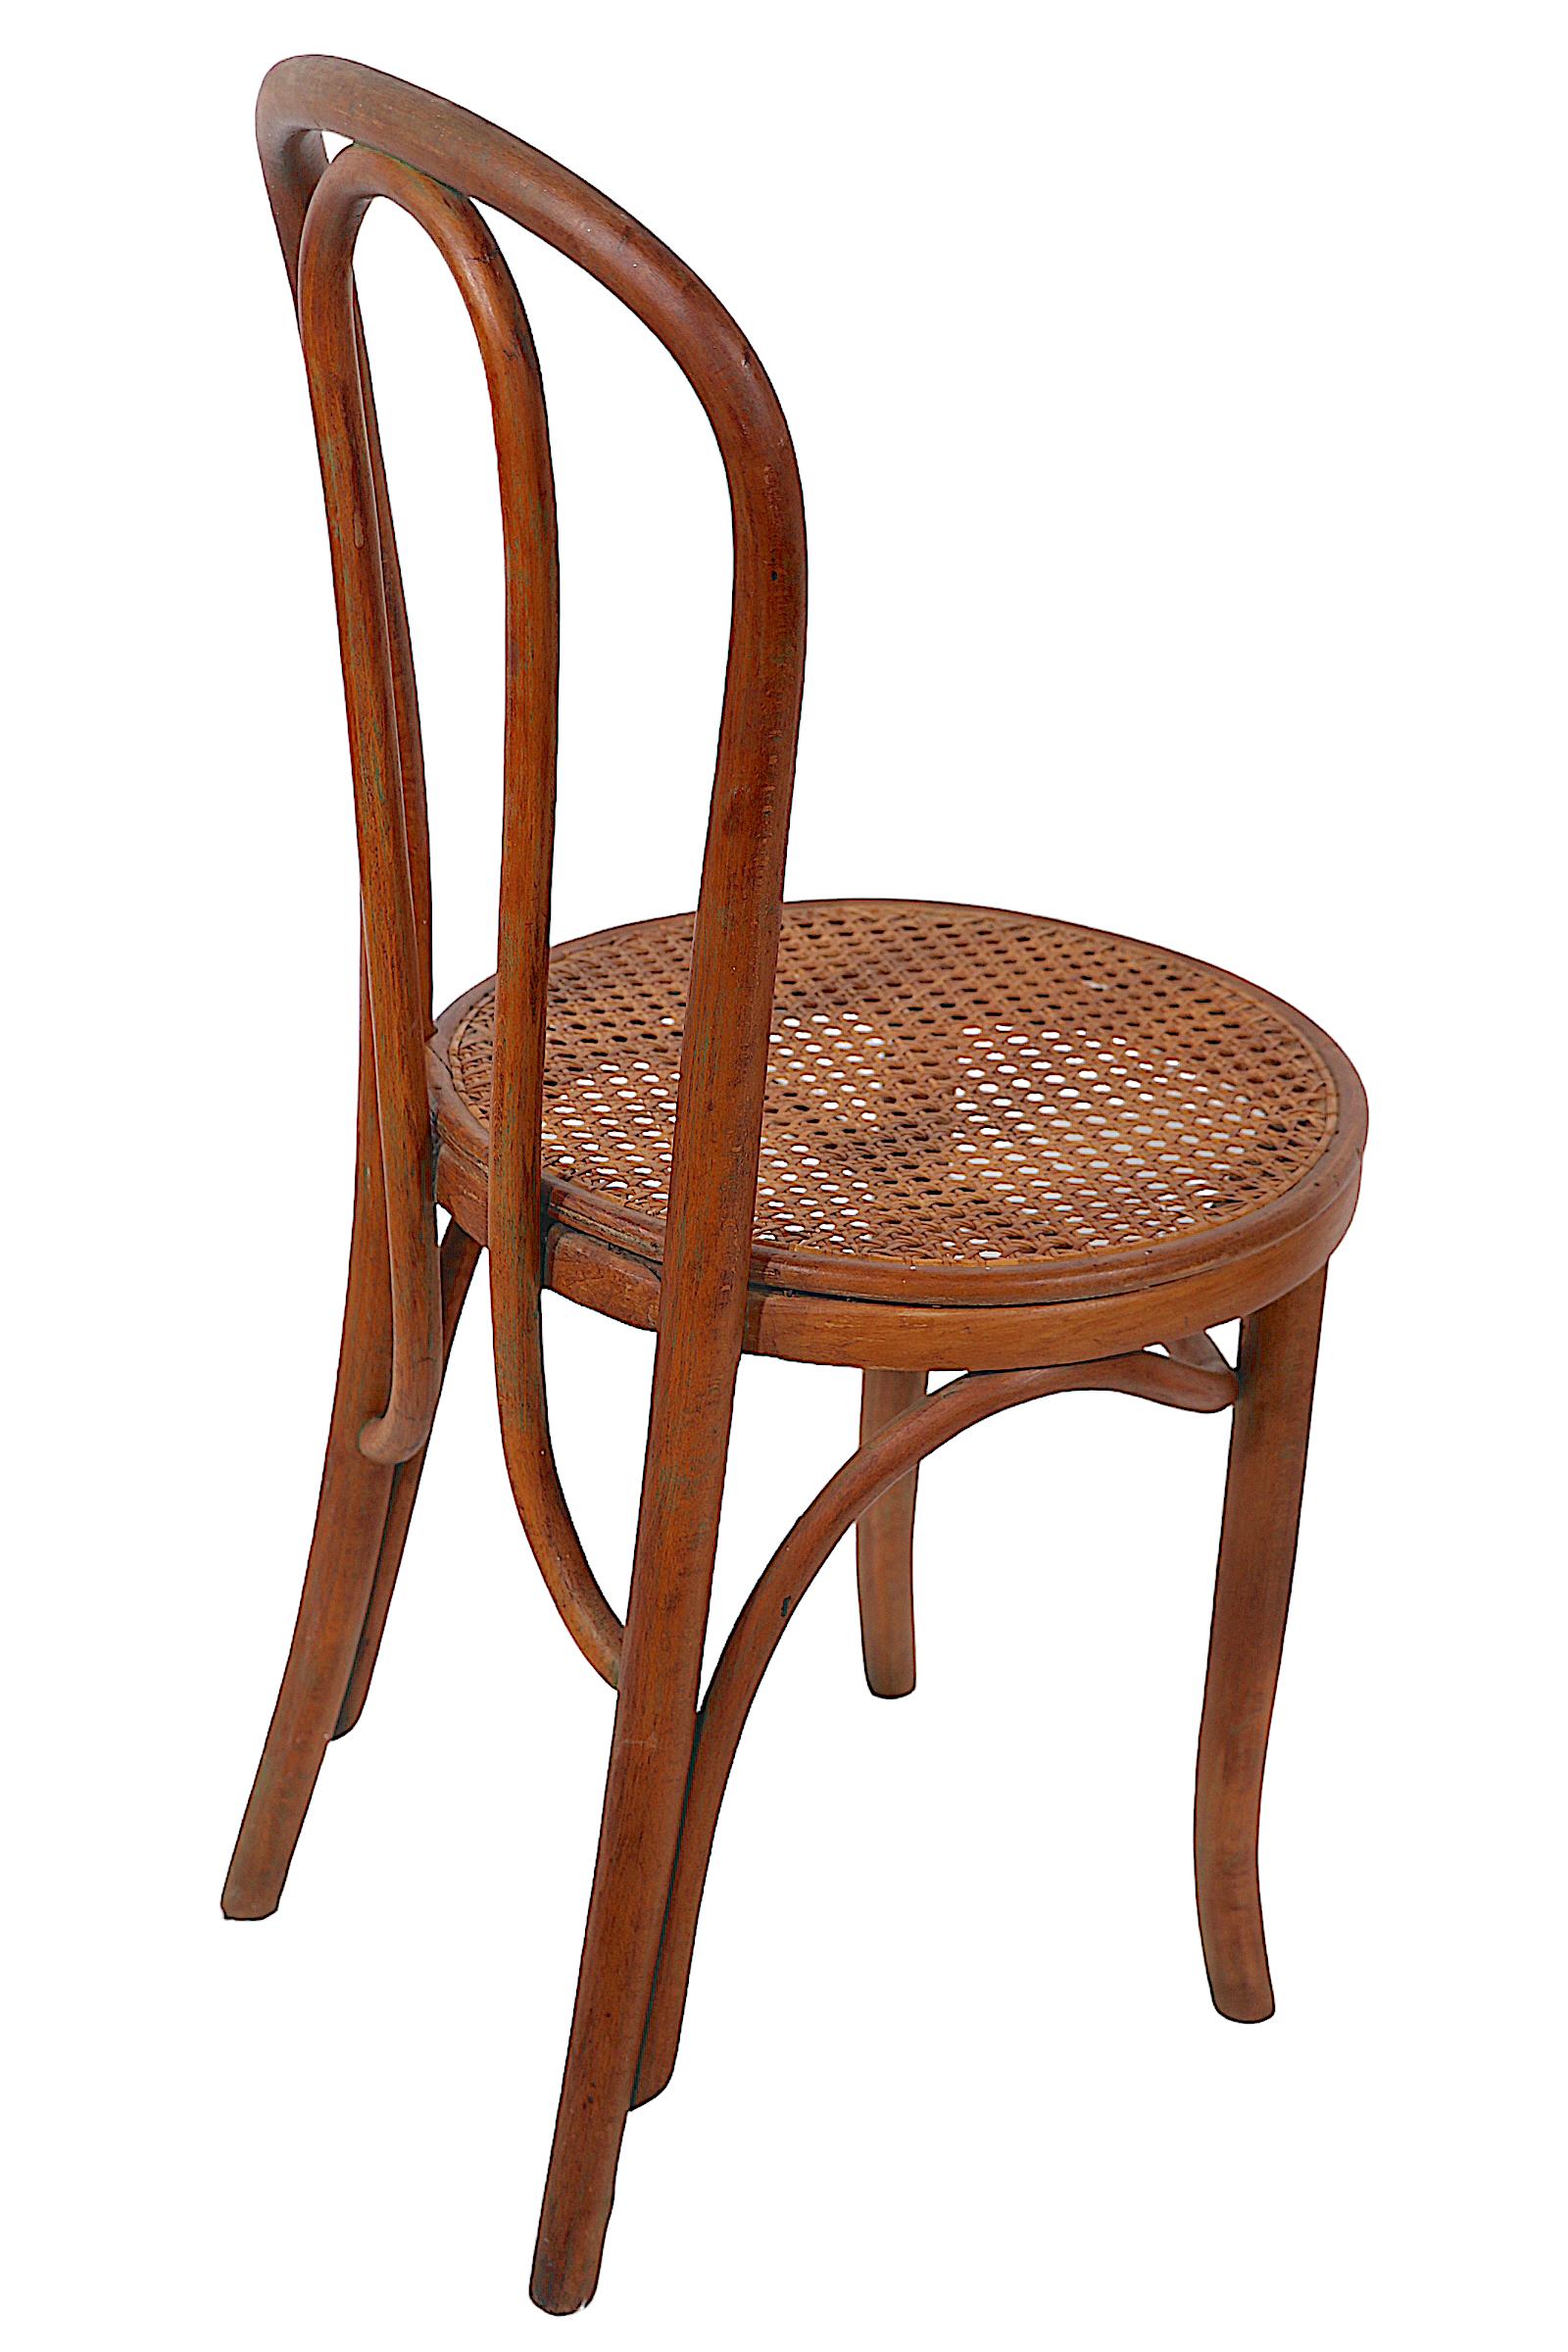 Cane Vienna Secessionist Bentwood Chair by Kohn Mundus  For Sale